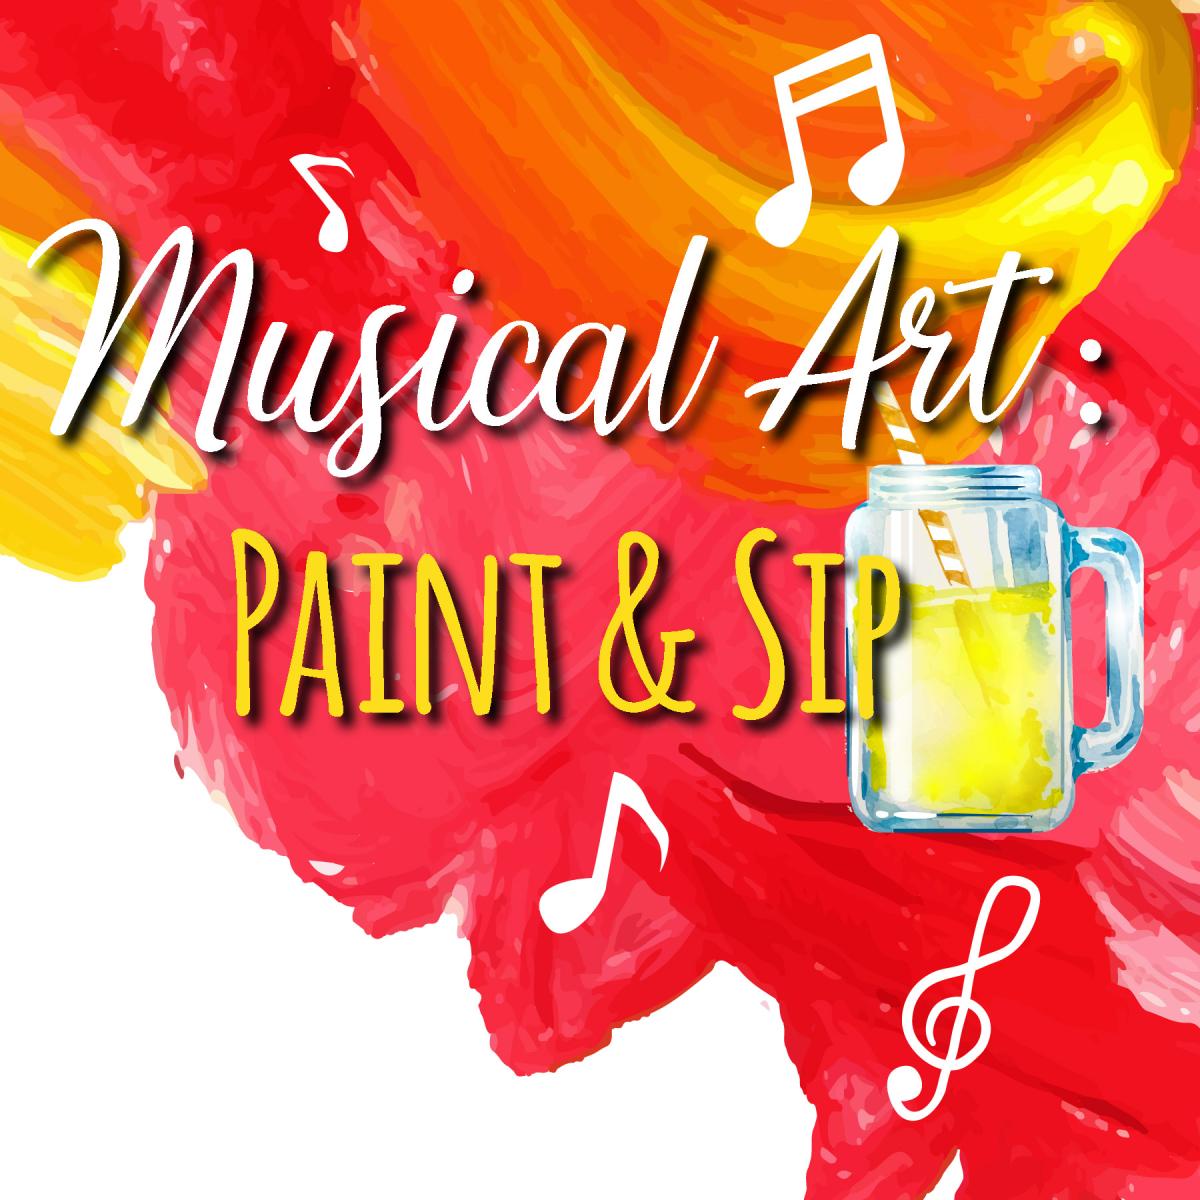 "Musical Art: Paint & Sip" text on top of a painted background with musical notes and a mug of lemonade